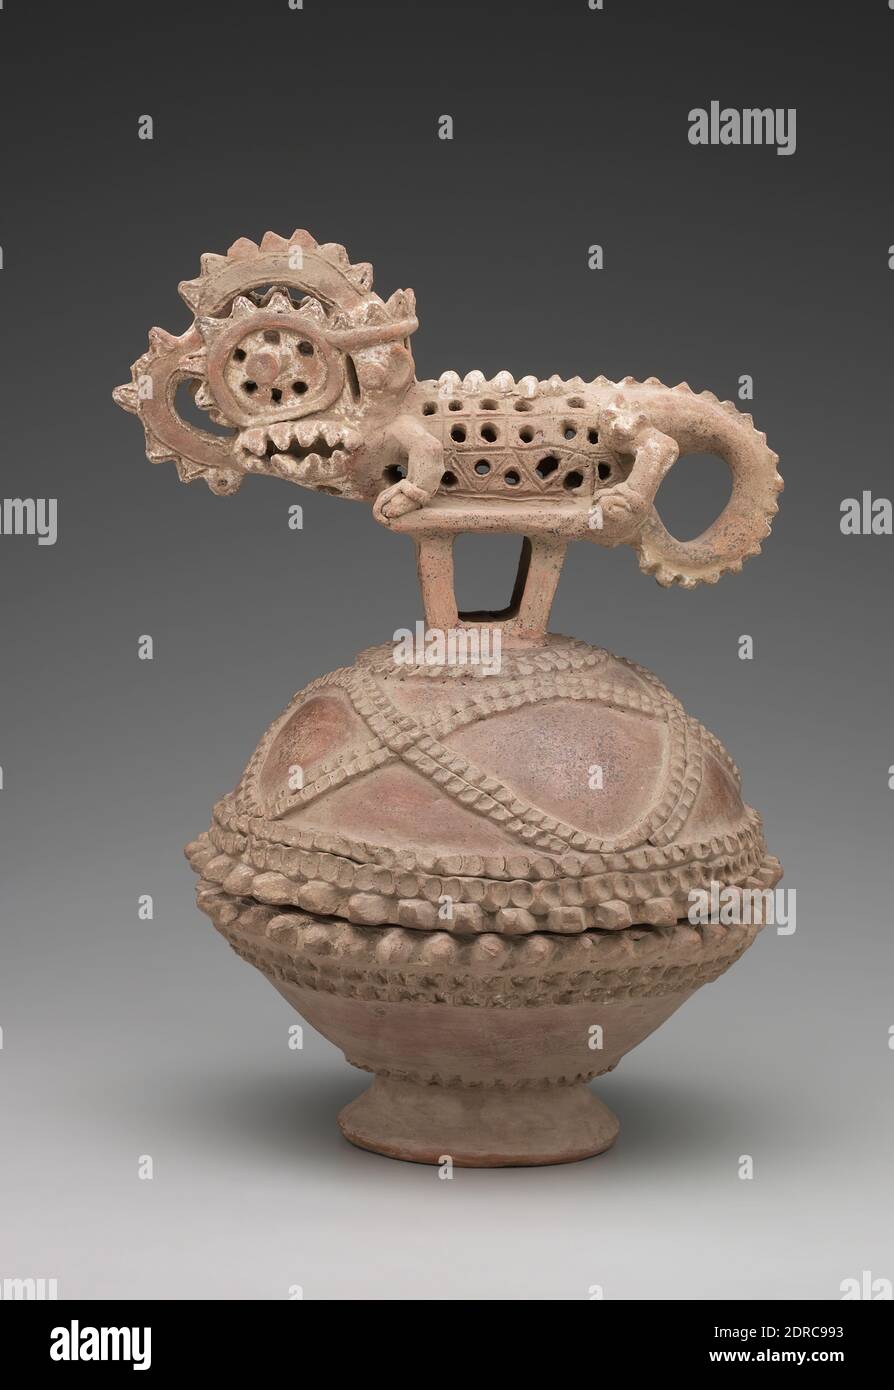 Vessel and Lid with Fantastic Reptile, Ceramic, Bowl or base: 12.1 cm (4 3/4 in.), Plumes of smoke enveloped the snarling alligator when incense was burned inside this vessel. The artist belted the body of the incensario with appliquéd pellets reminiscent of alligator hide. , Made in Costa Rica, Costa Rica, Guanacaste, Period VI, Containers - Ceramics Stock Photo